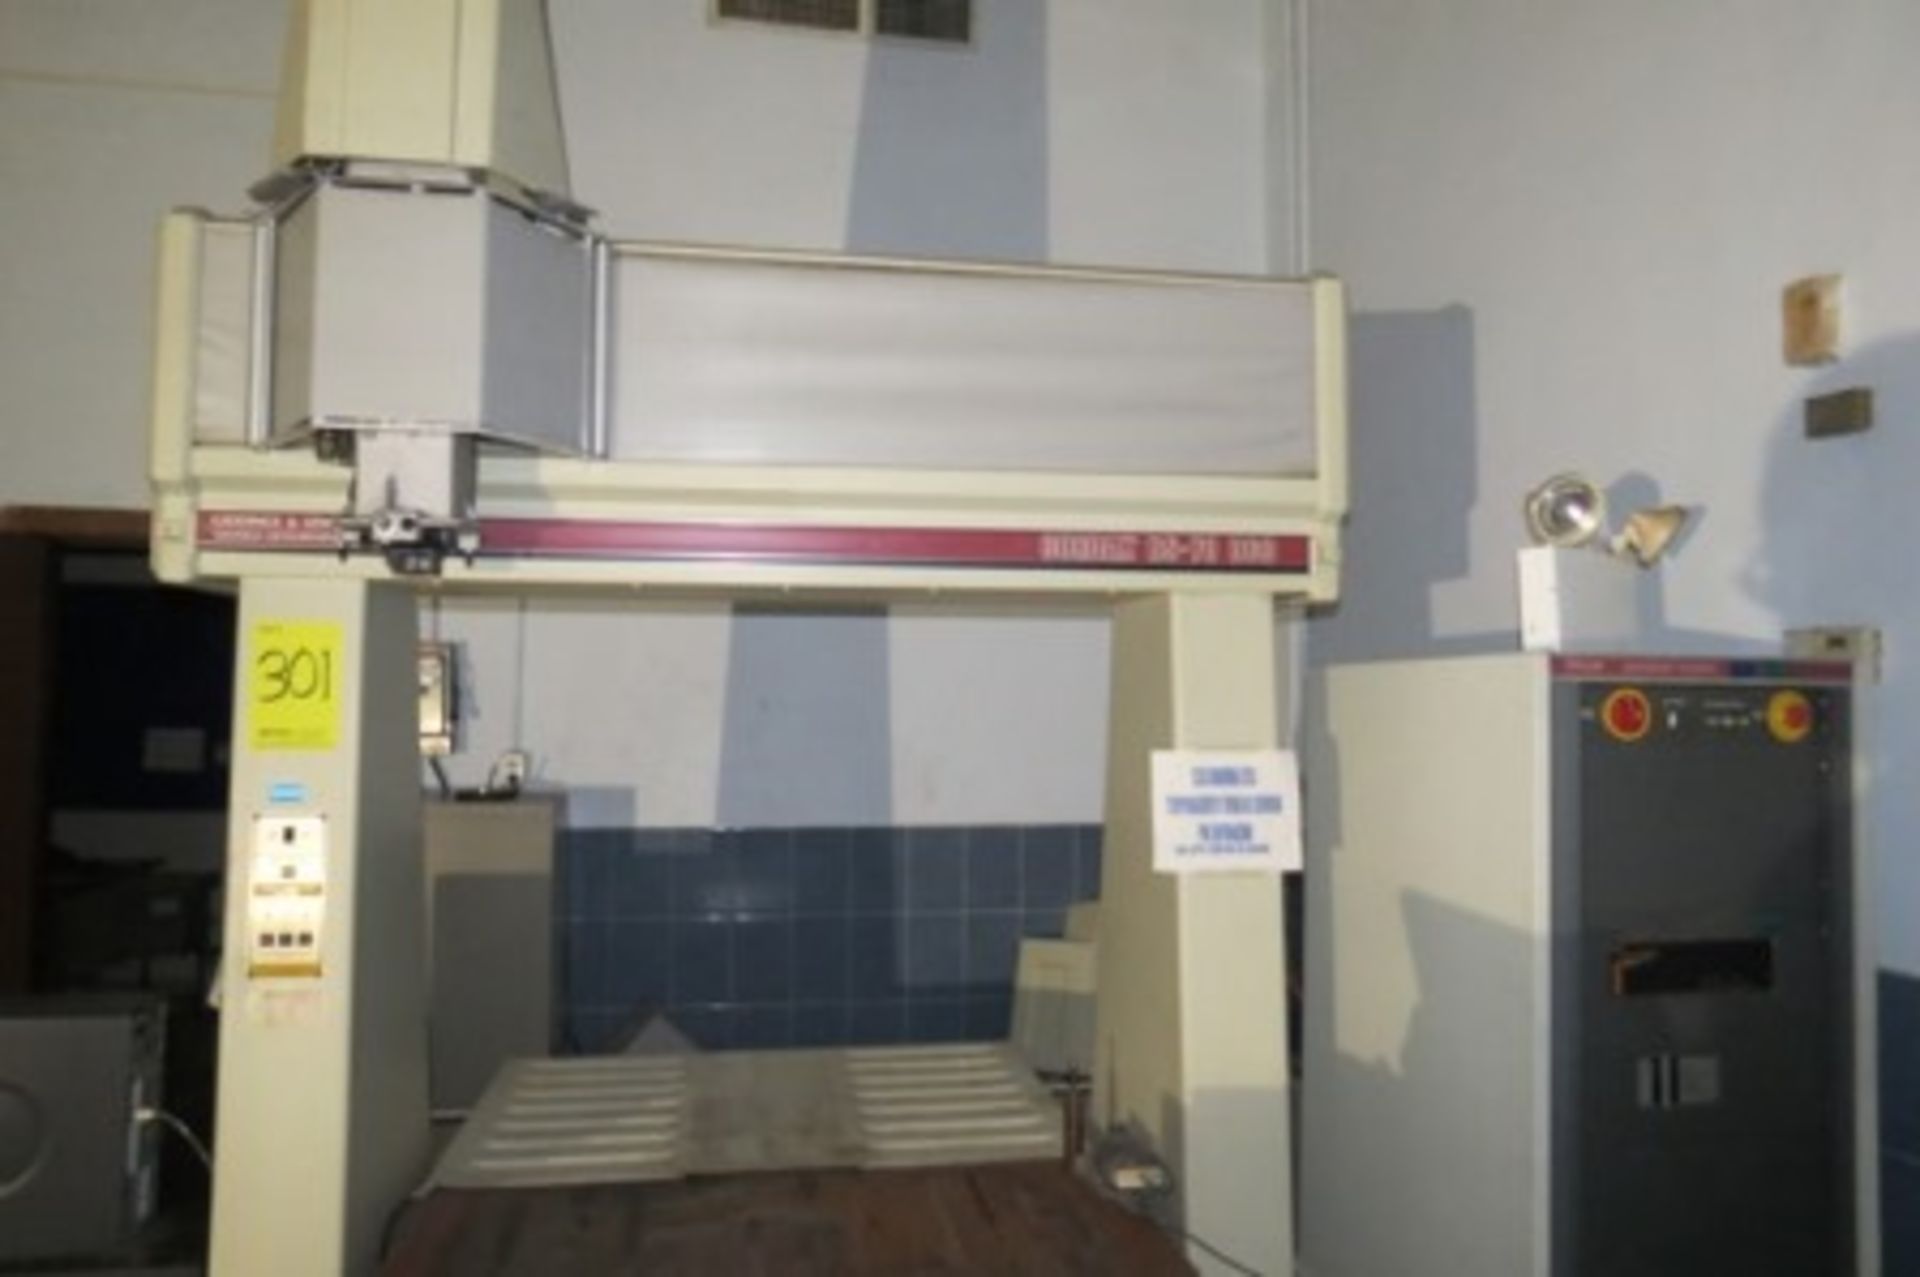 Giddings & Lewis Cordax RS-70 s/n A-0831-1094, coordinate measuring machine - Image 2 of 23